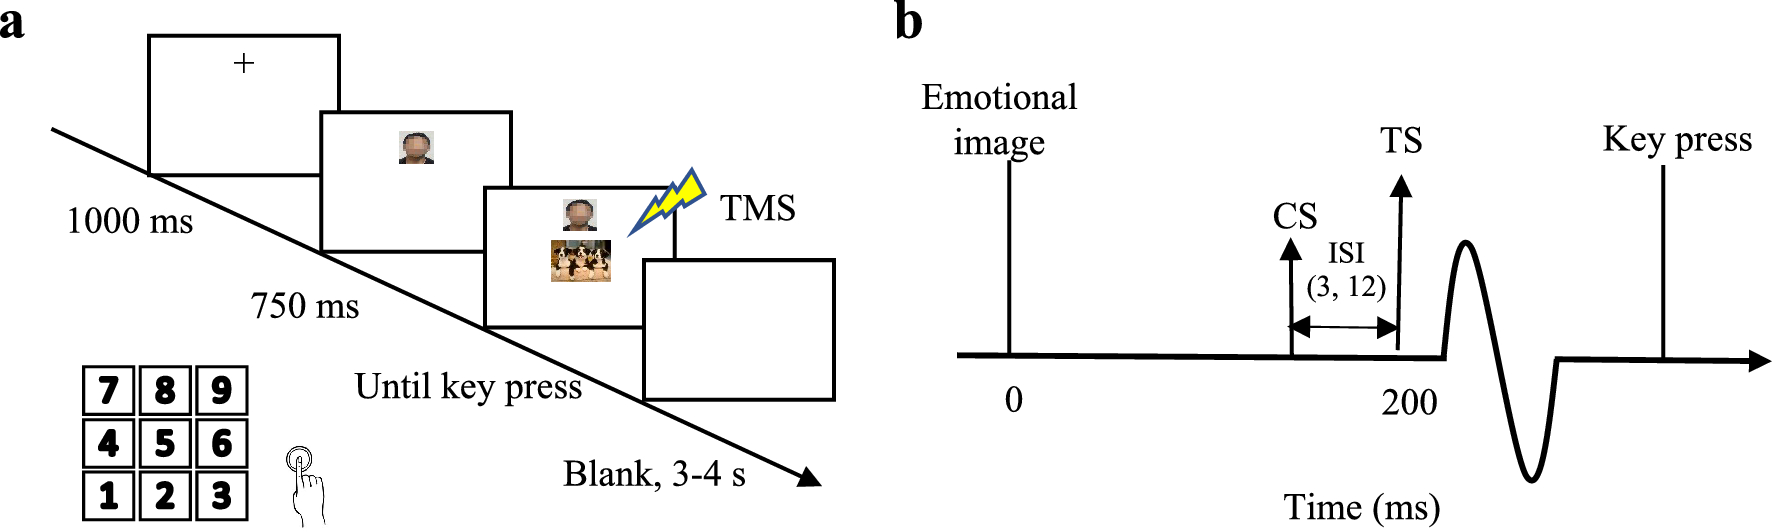 Modulation of intracortical circuits in primary motor cortex during automatic action tendencies